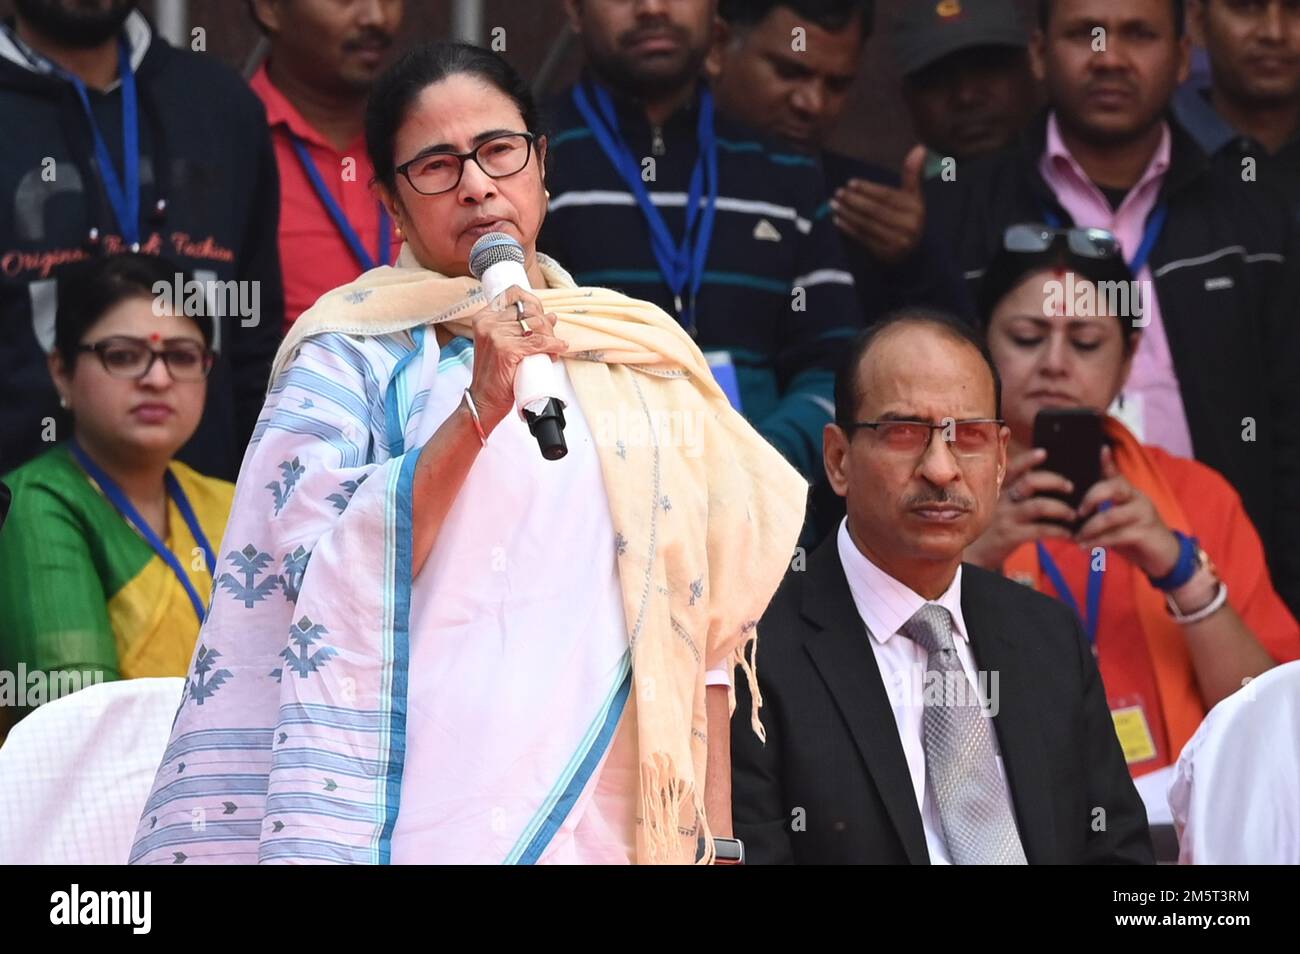 KOLKATA, INDIA - DECEMBER 30: Chief minister Mamata Banerjee refuse to take seat on dias due to Jai Shree Ram slogans and seats alone beside dias during flags off of Vande Bharat Express Train from Howrah to NJP at Howrah station on December 30, 2022 in Kolkata, India. Soon after performing the last rites of his mother Heeraben in Ahmedabad, Prime Minister Narendra Modi attended pre-planned developmental works including flagging off Vande Bharat Express connecting Howrah to New Jalpaiguri, in West Bengal, via video conferencing. This is West Bengal's first and the country's seventh Vande Bhara Stock Photo